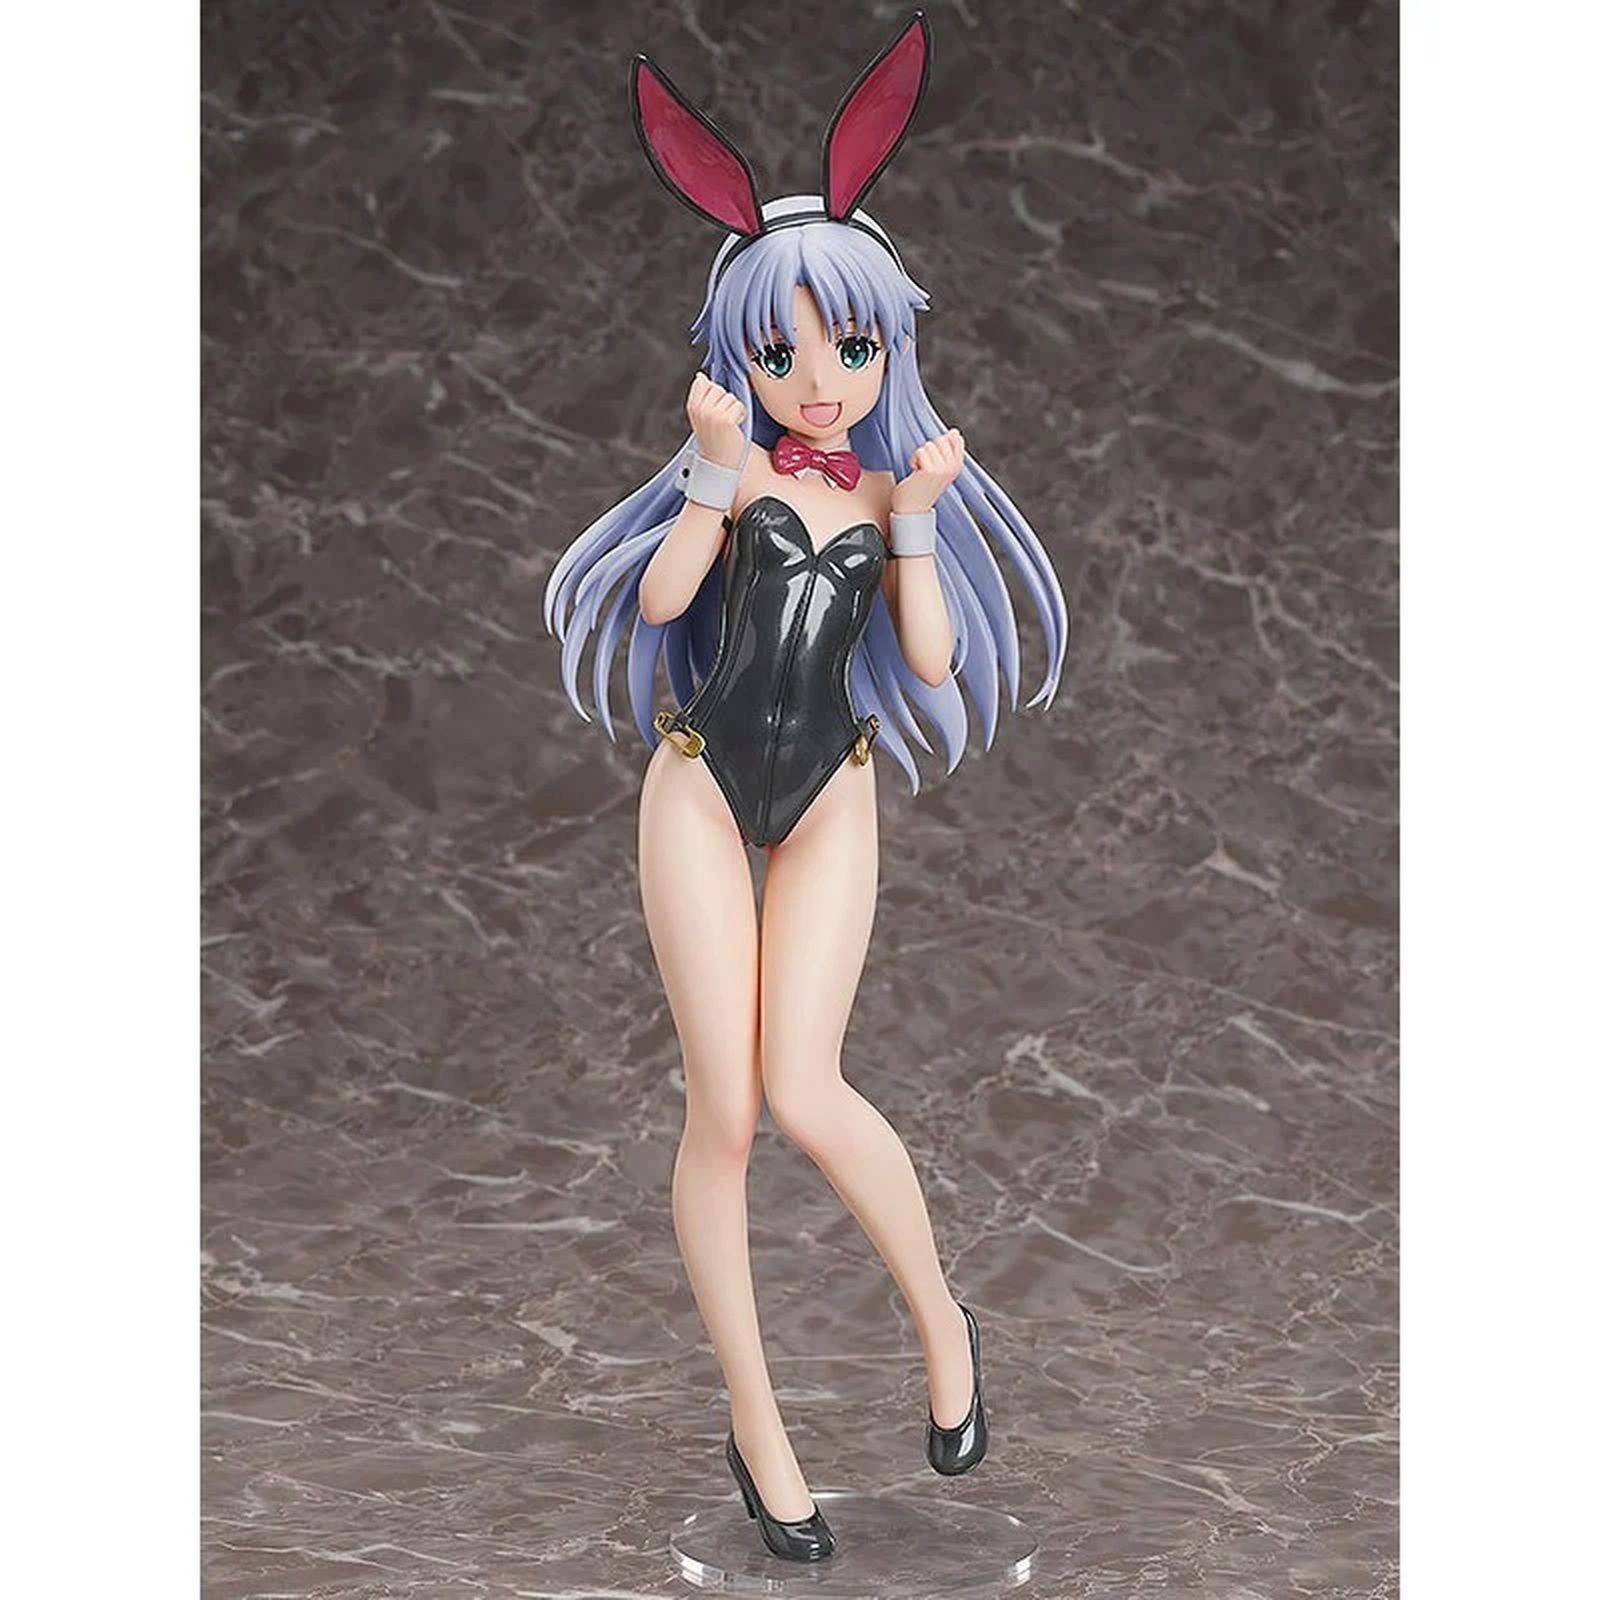 INDEX BARE LEG BUNNY VER FIG 41 CM A CERTAIN MAGICAL INDEX 1/4 SCALE